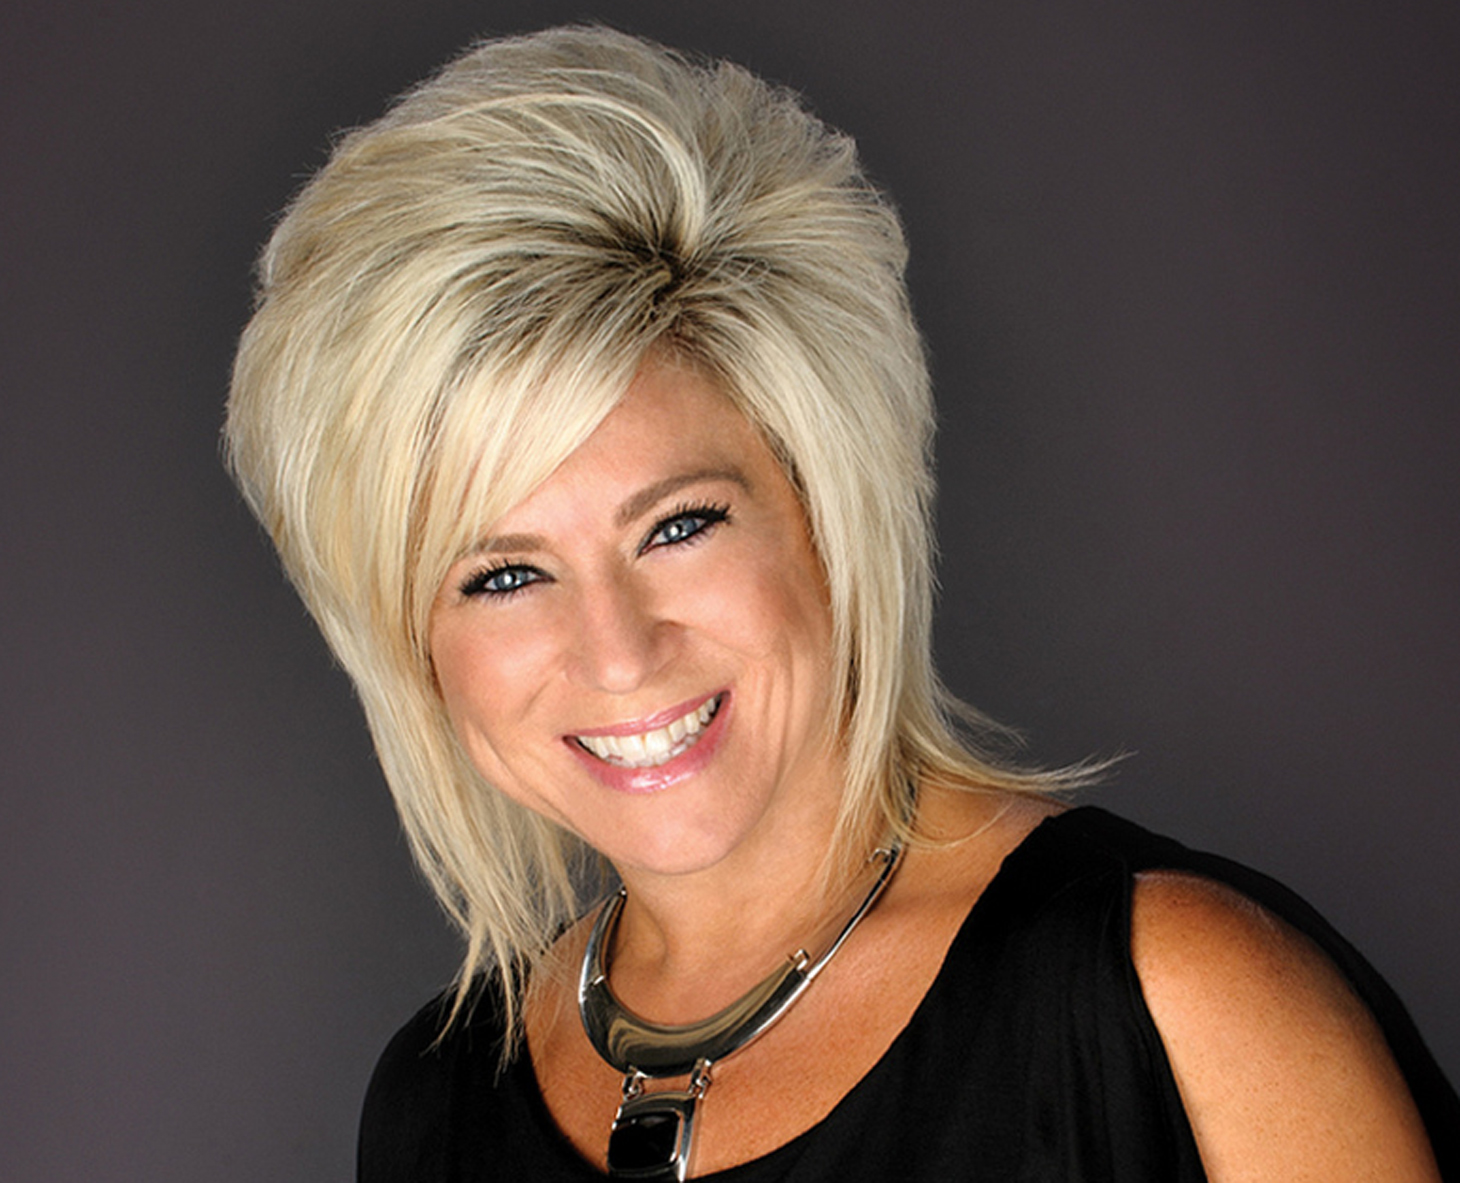 An Amazing Thing Happened After TLC’s “Long Island Medium” Premiere